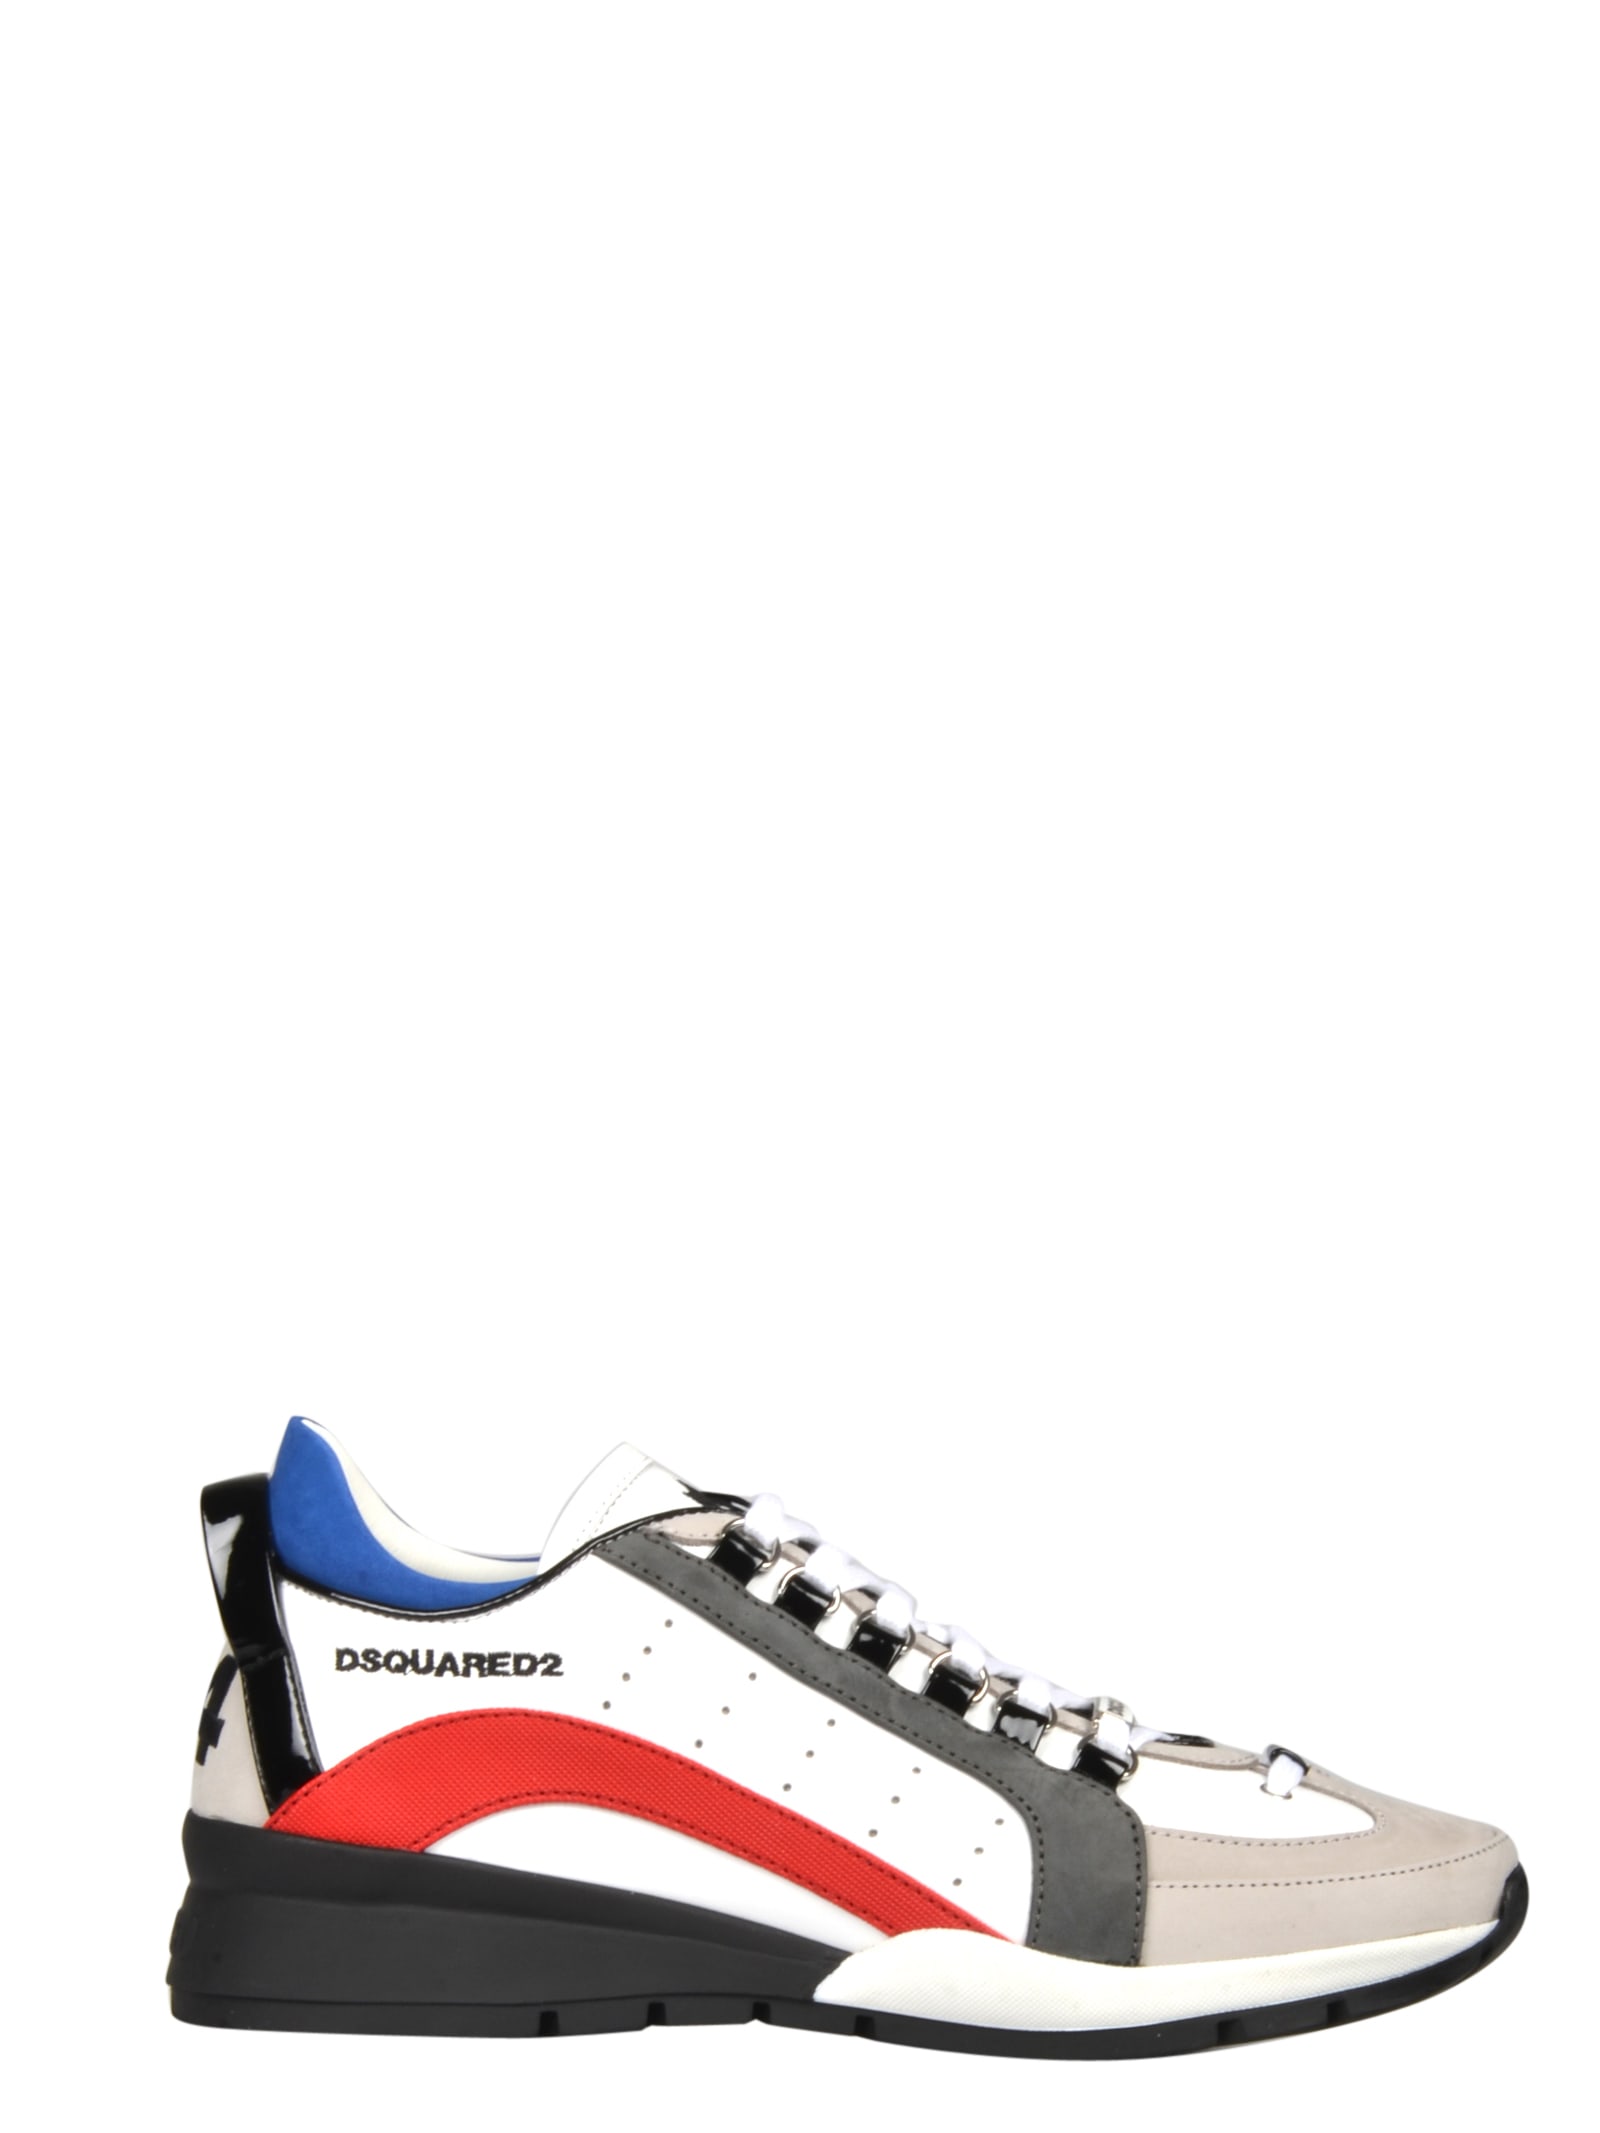 Dsquared2 Shoes | italist, ALWAYS LIKE 